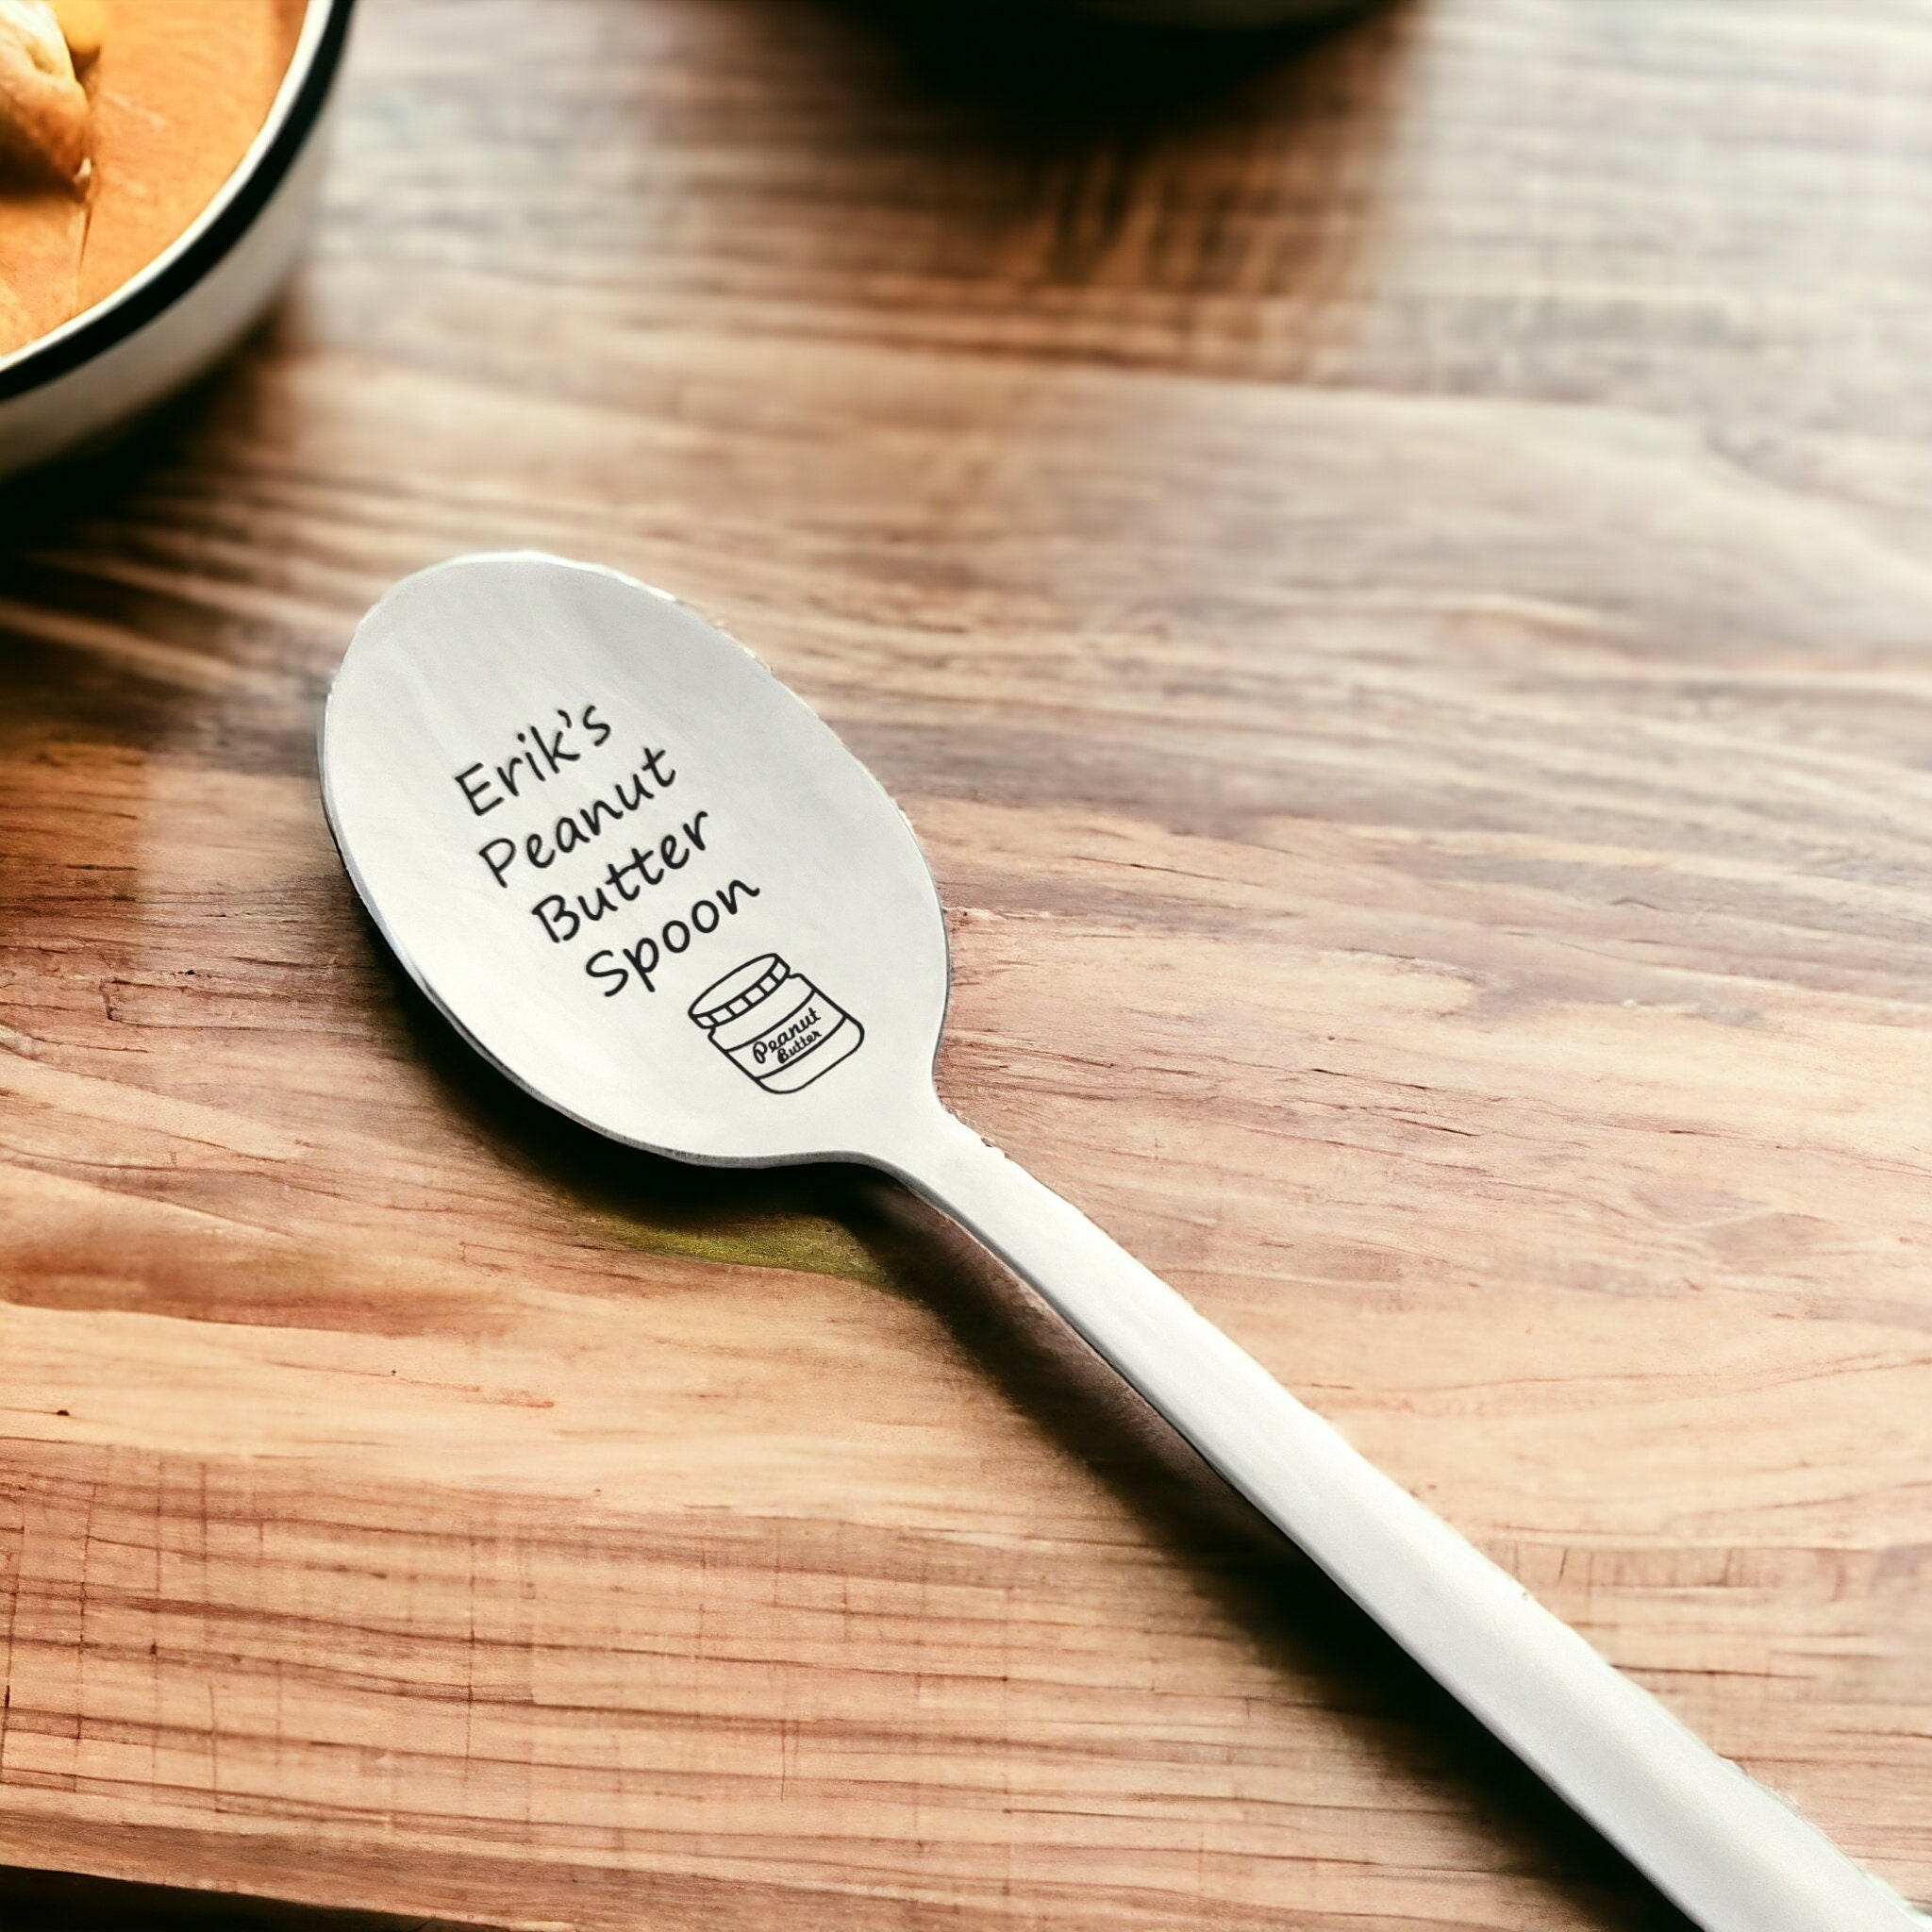 Peanut-butter-knife-spoon-fork-custom-stamped-name-personalized-gift-engraved-shabby-chic-silverware-server-teaspoon-tablespoon-silver-jelly  